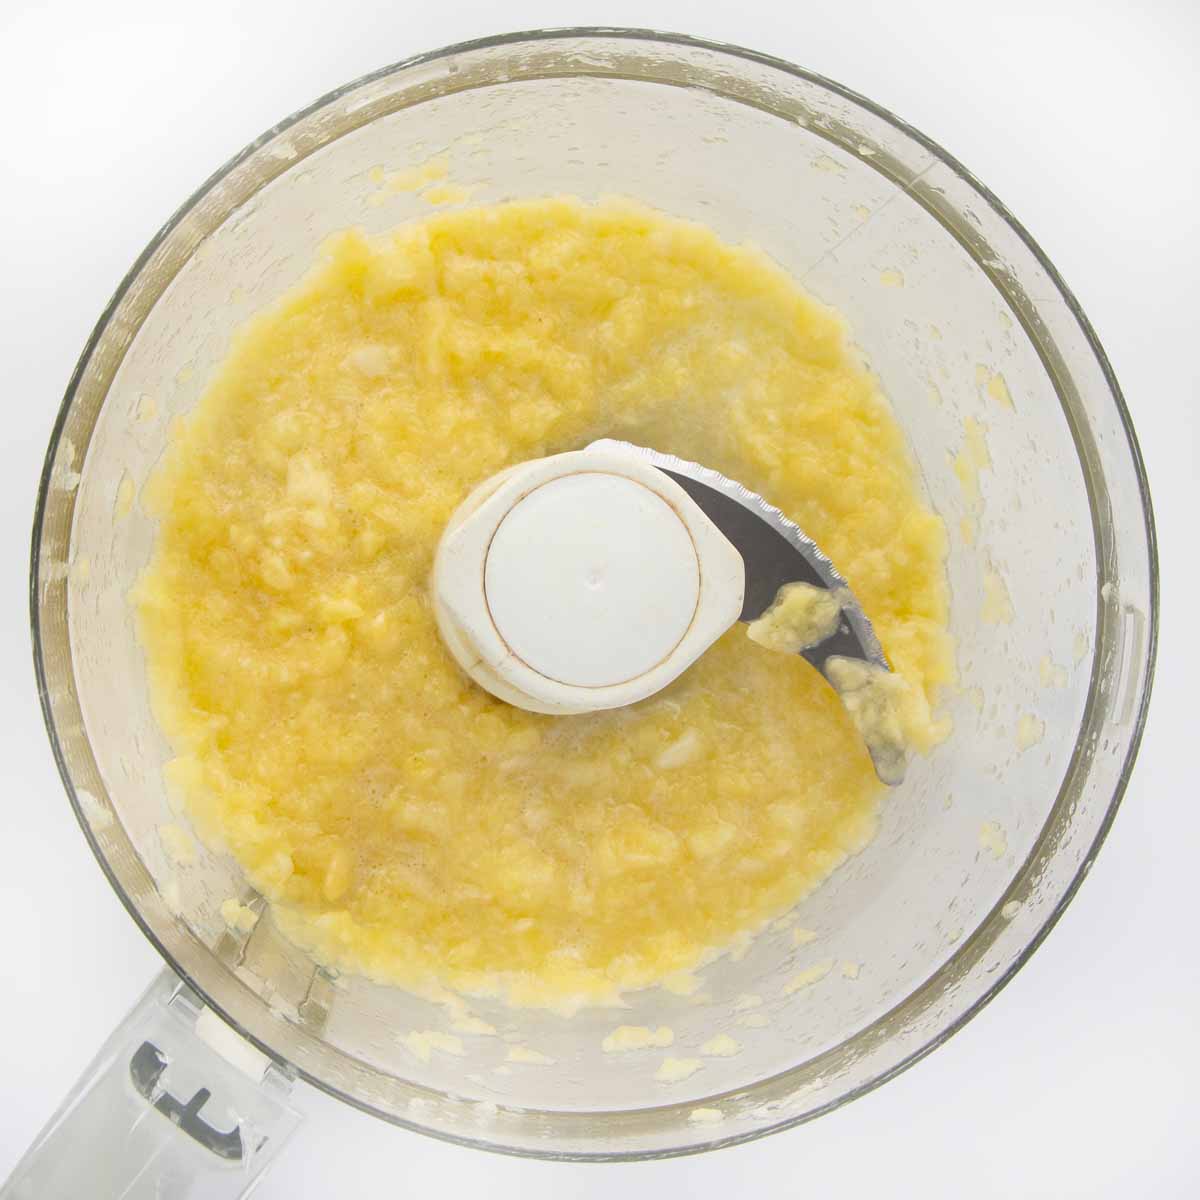 crushed pineapple in food processor